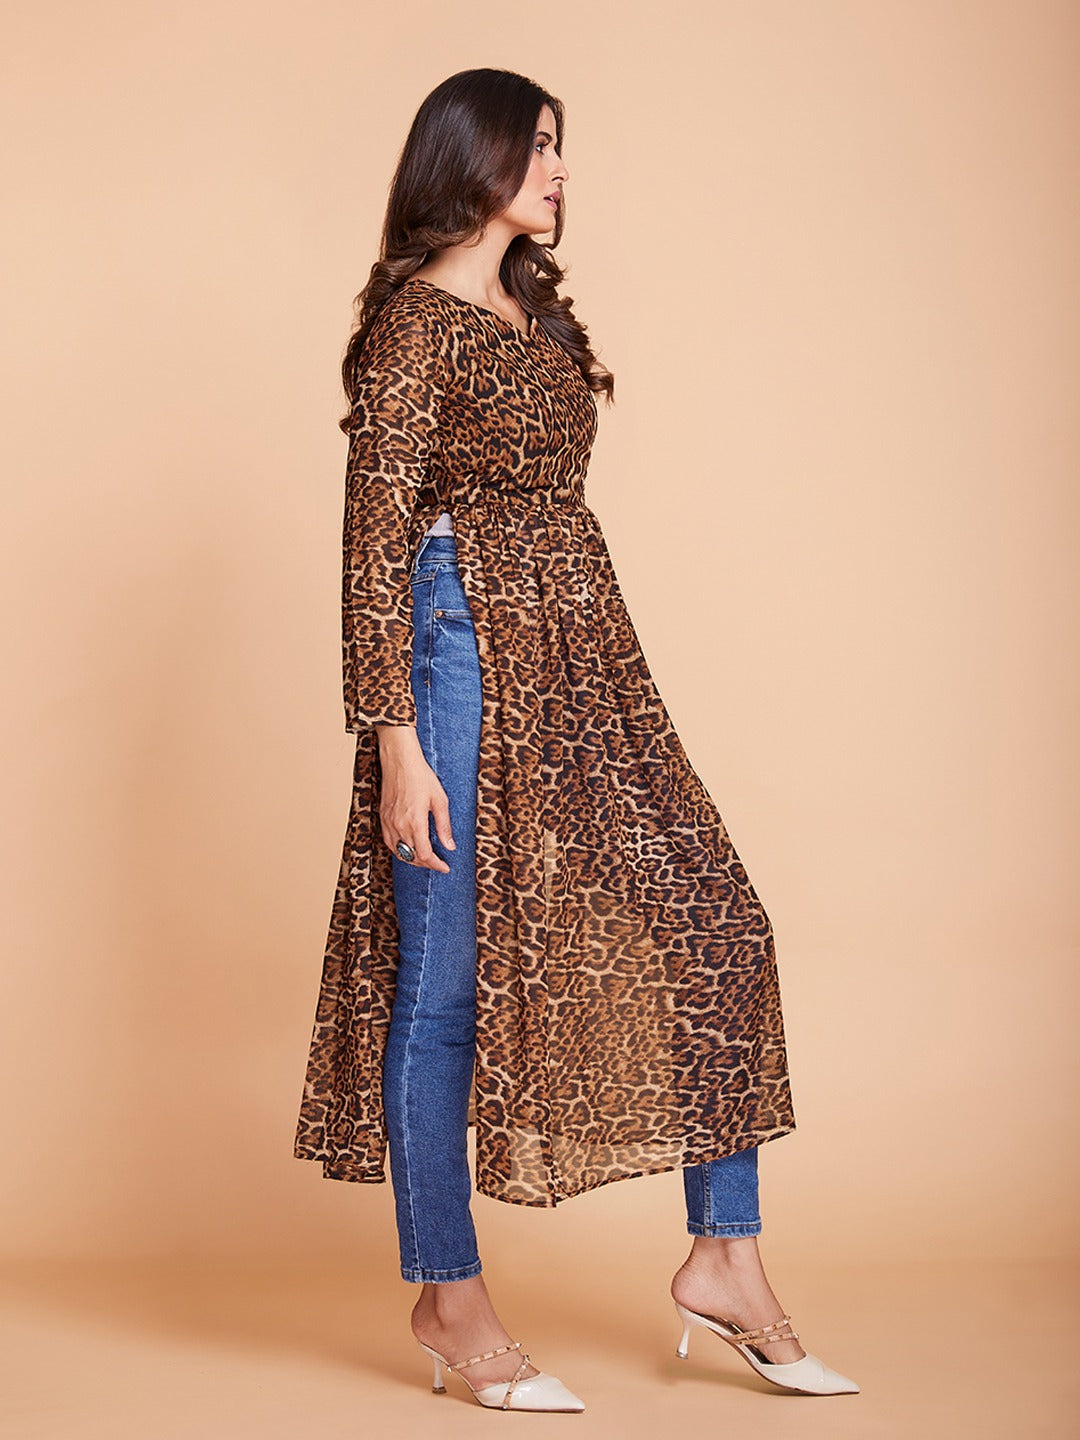 The Leopard Print Dress Is A Summer Hit | The Stylist And The Wardrobe | Leopard  print dress, Print clothes, Printed kurti designs